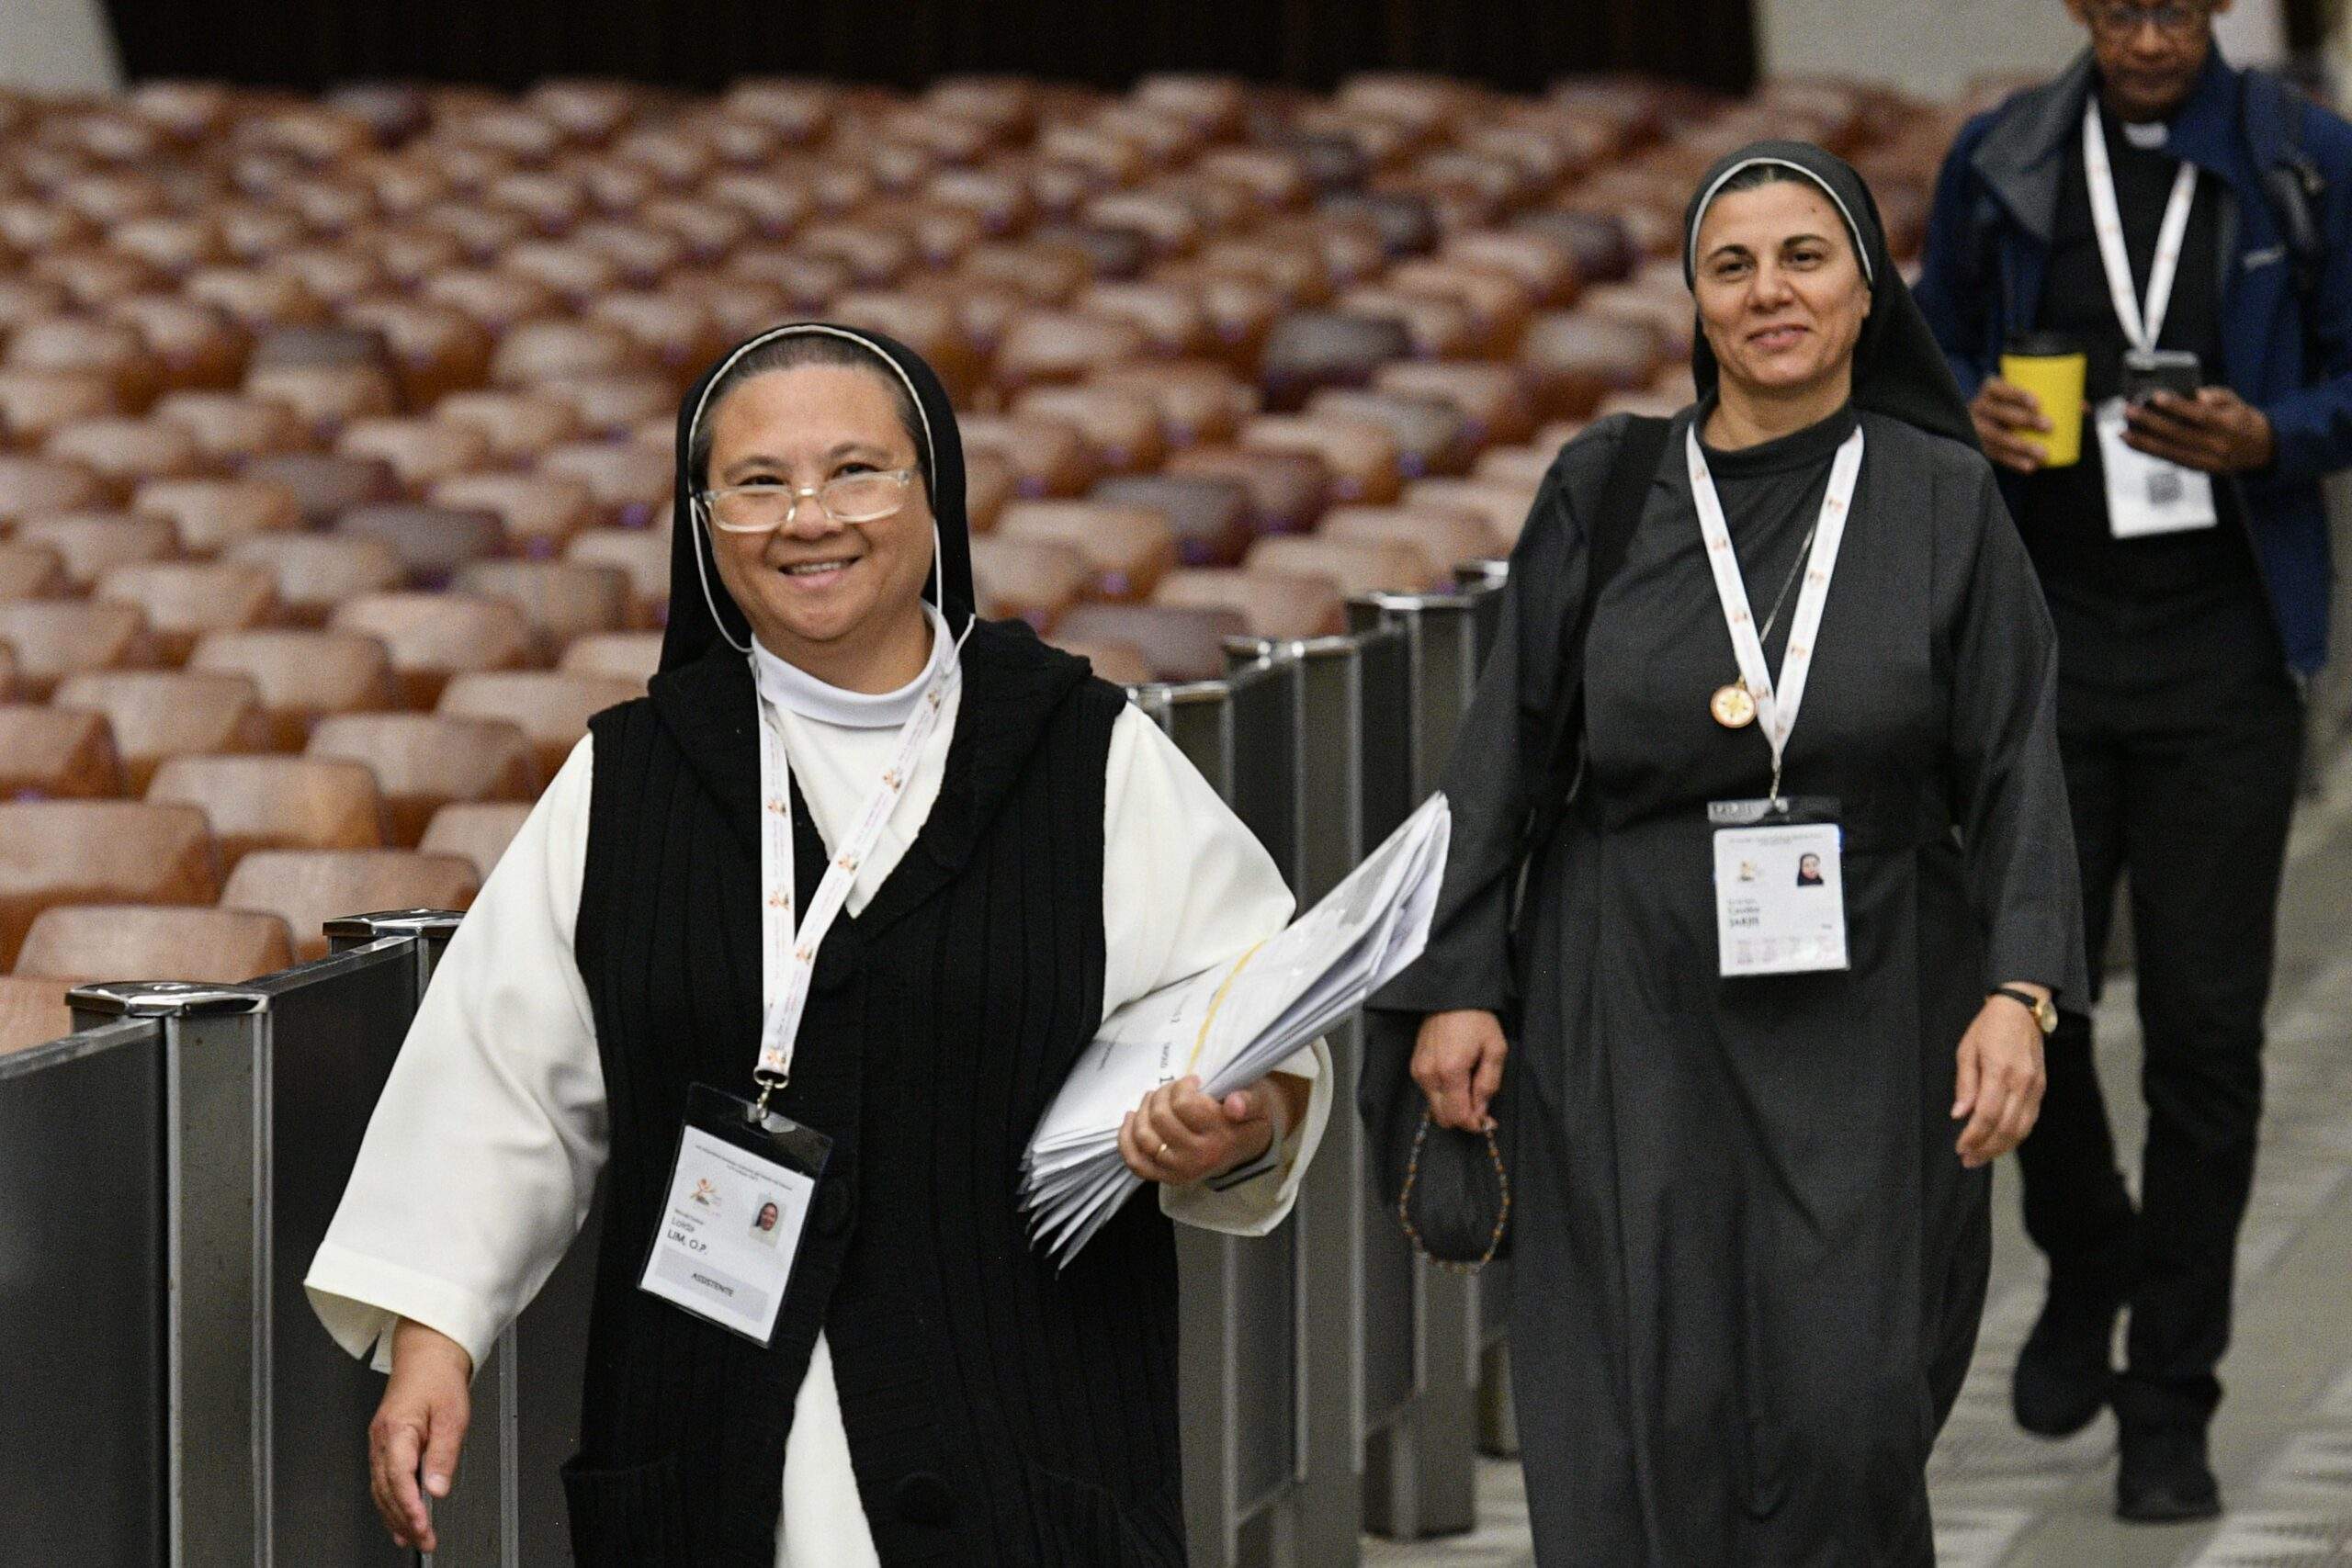 Sister Loida Lim, a member of the Missionaries of St. Dominic, and Sister Caroline Saheed Jarjis, a member of the Daughters of the Sacred Heart of Jesus, arrive for the afternoon session of the assembly of the Synod of Bishops in the Paul VI Audience Hall at the Vatican Oct. 13, 2023. (CNS photo/Vatican Media)